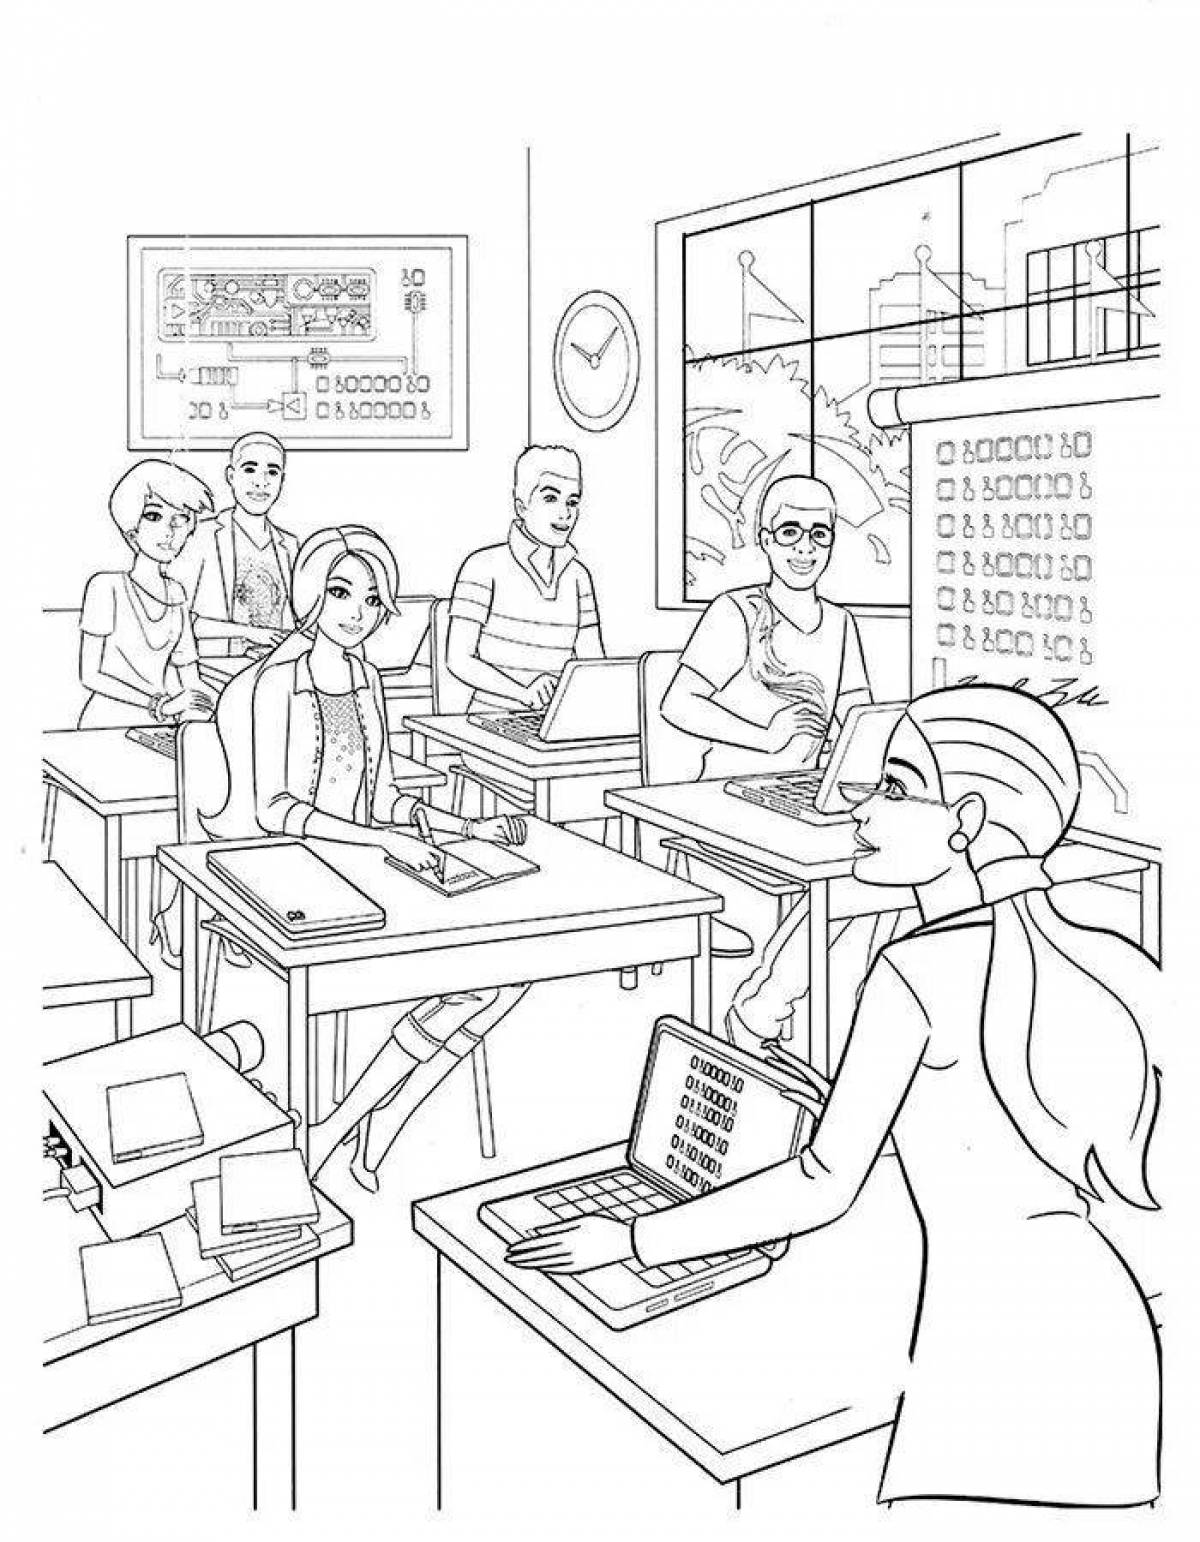 Colorful bright coloring page in the classroom